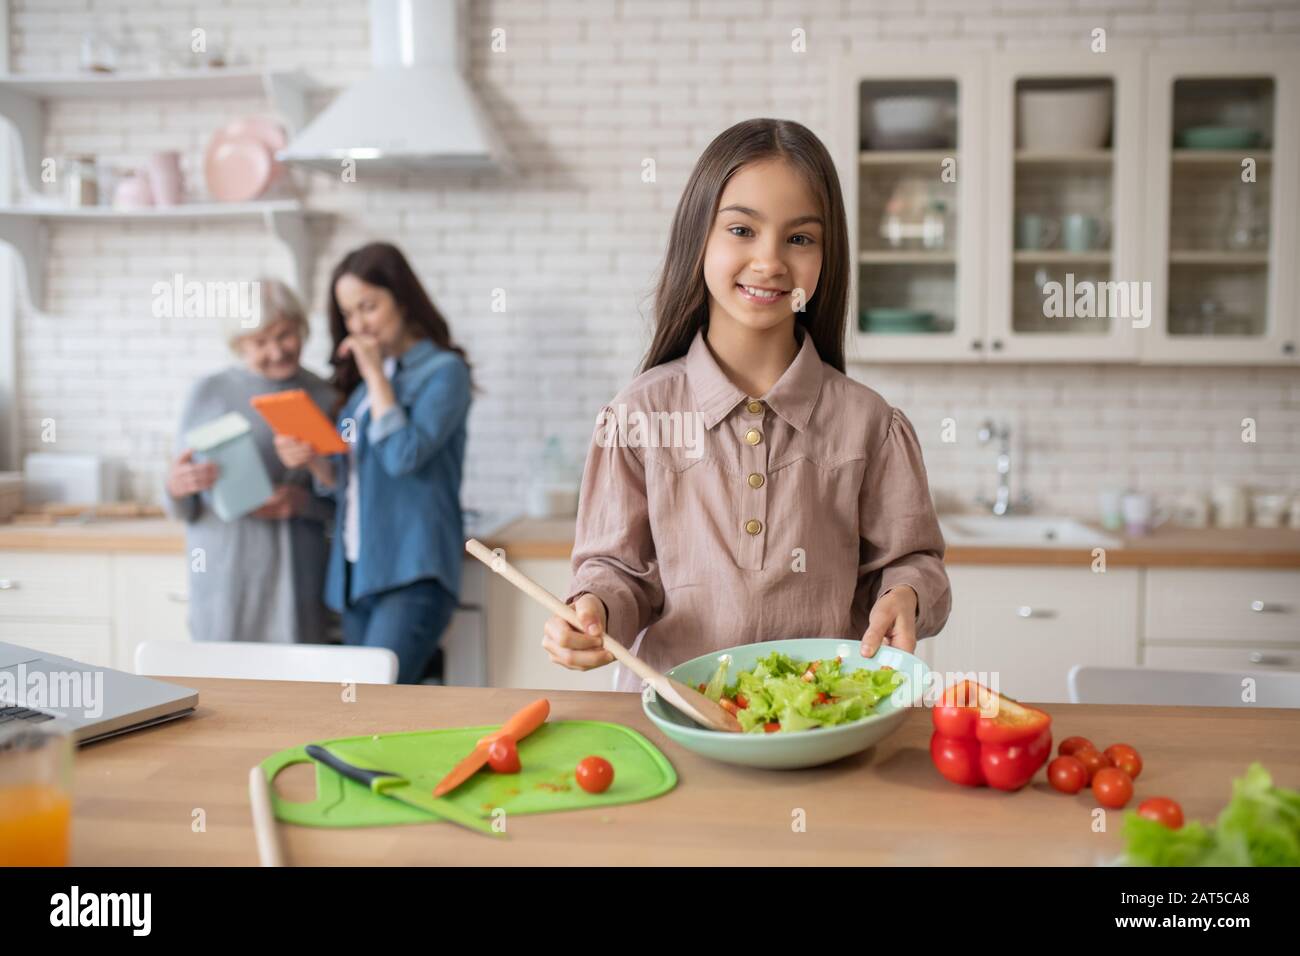 Little girl in the kitchen showing cooked salad. Stock Photo